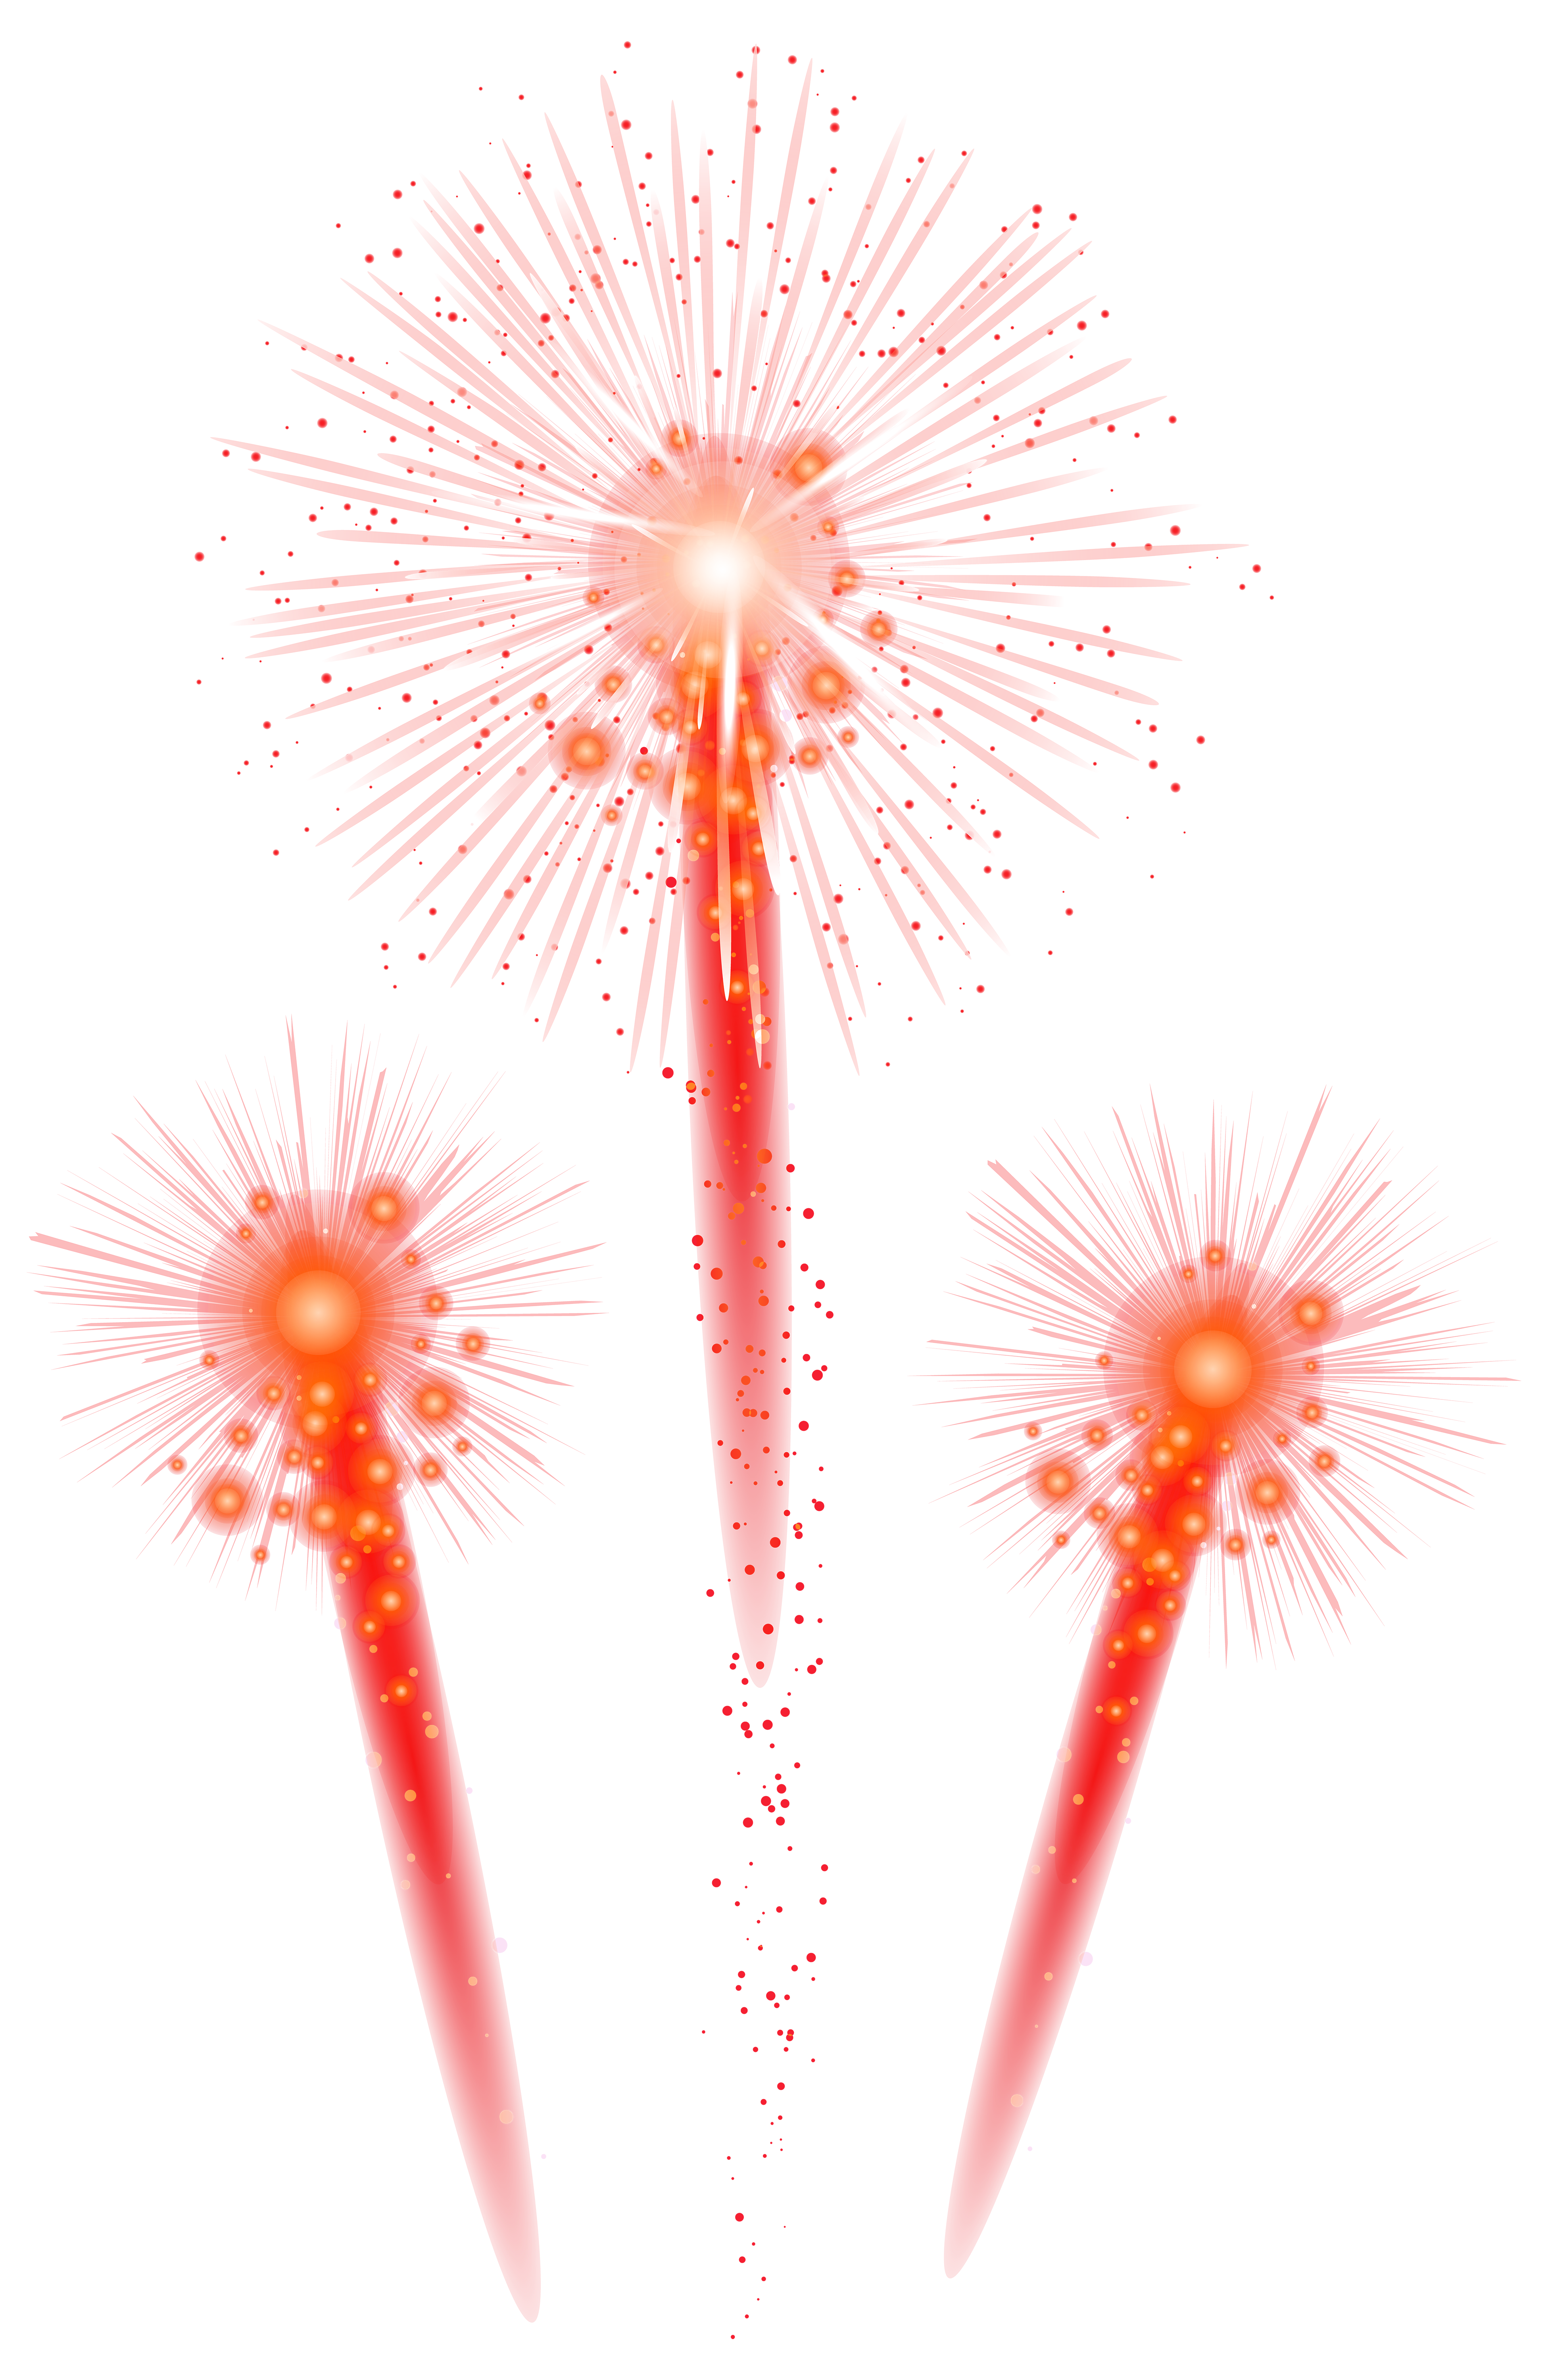 clipart fireworks silhouette